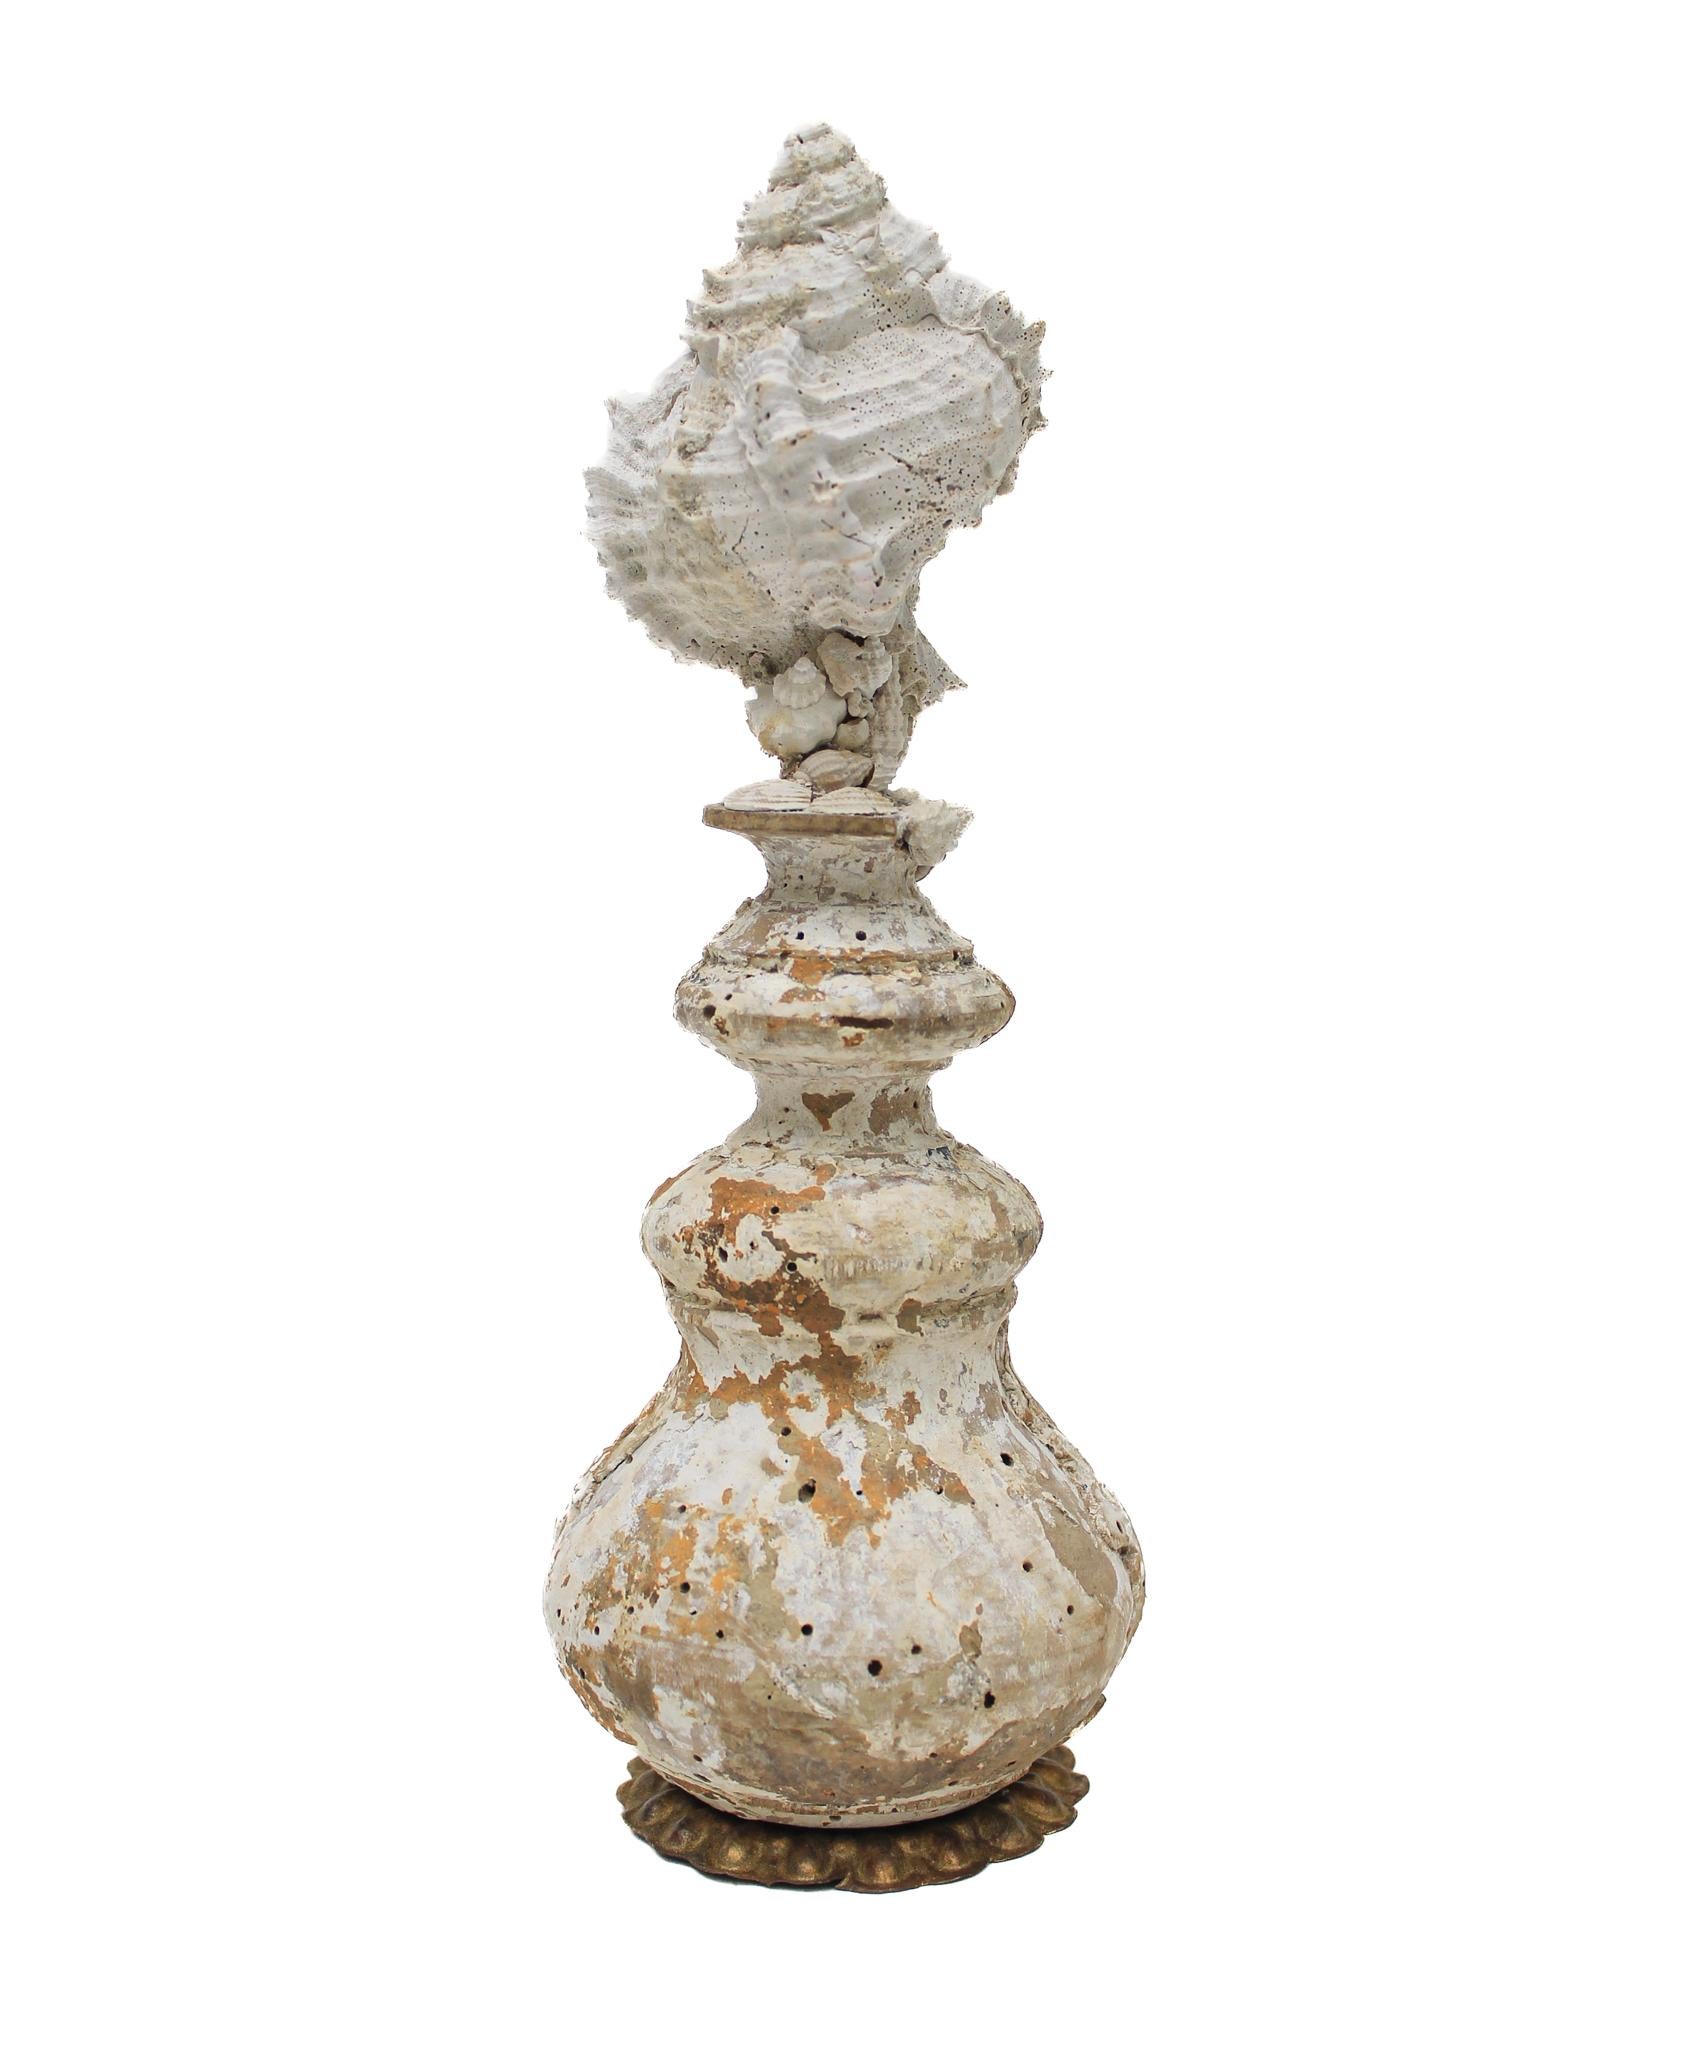 17th Century Italian Vase with a Hystrivasum Shell on an Antique Metal Stand 2